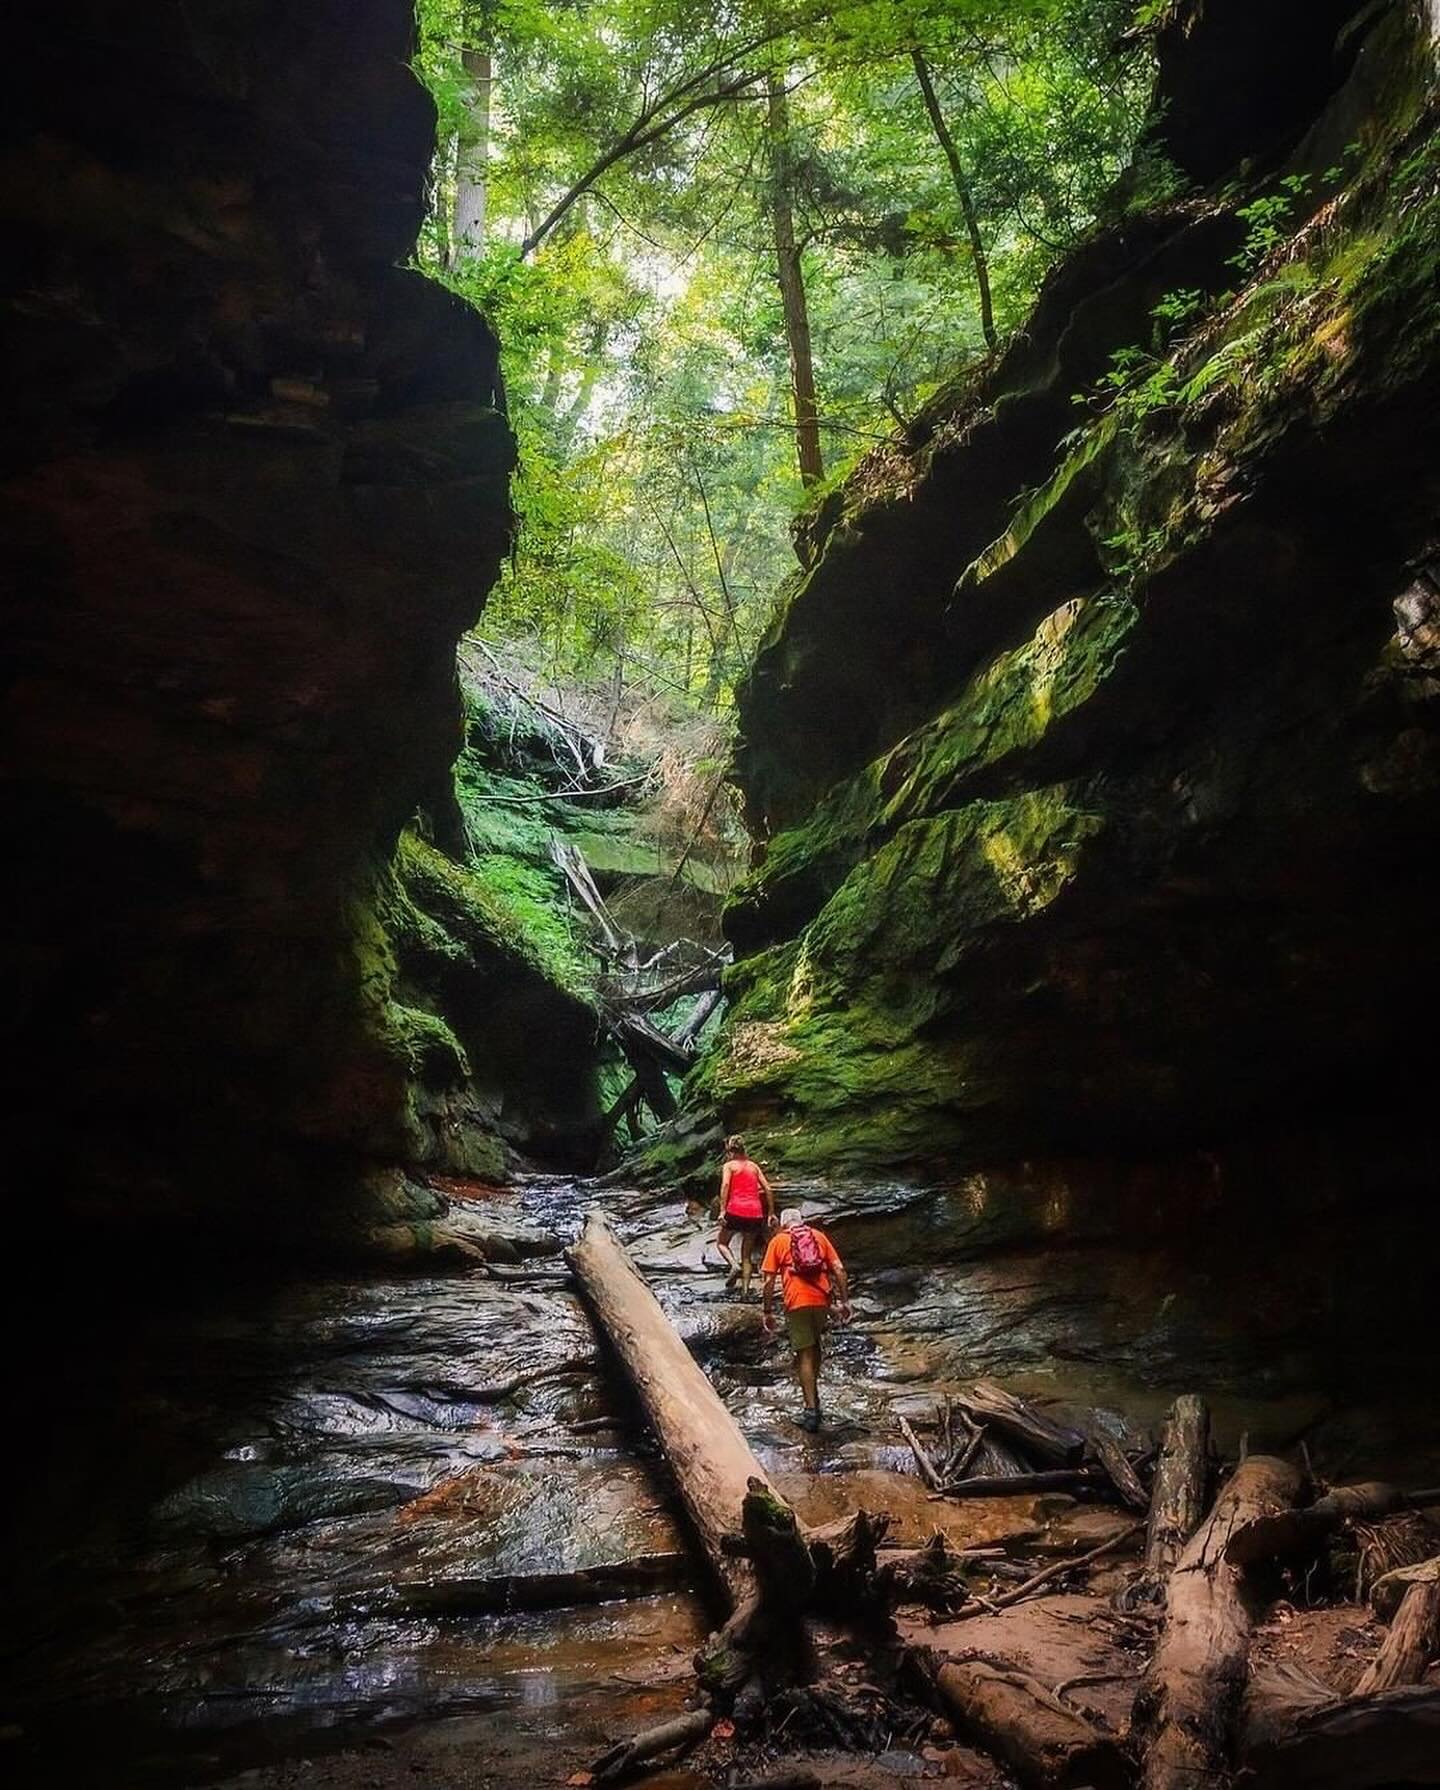 Discover Parke County&rsquo;s THREE State Parks! 🌿 FREE ADMISSION to all Indiana State Parks this Sunday, May 19th. 🎉

Explore Turkey Run&rsquo;s rugged canyons and scenic trails, Shades&rsquo; serene landscapes and waterfalls, and Raccoon Lake&rsq